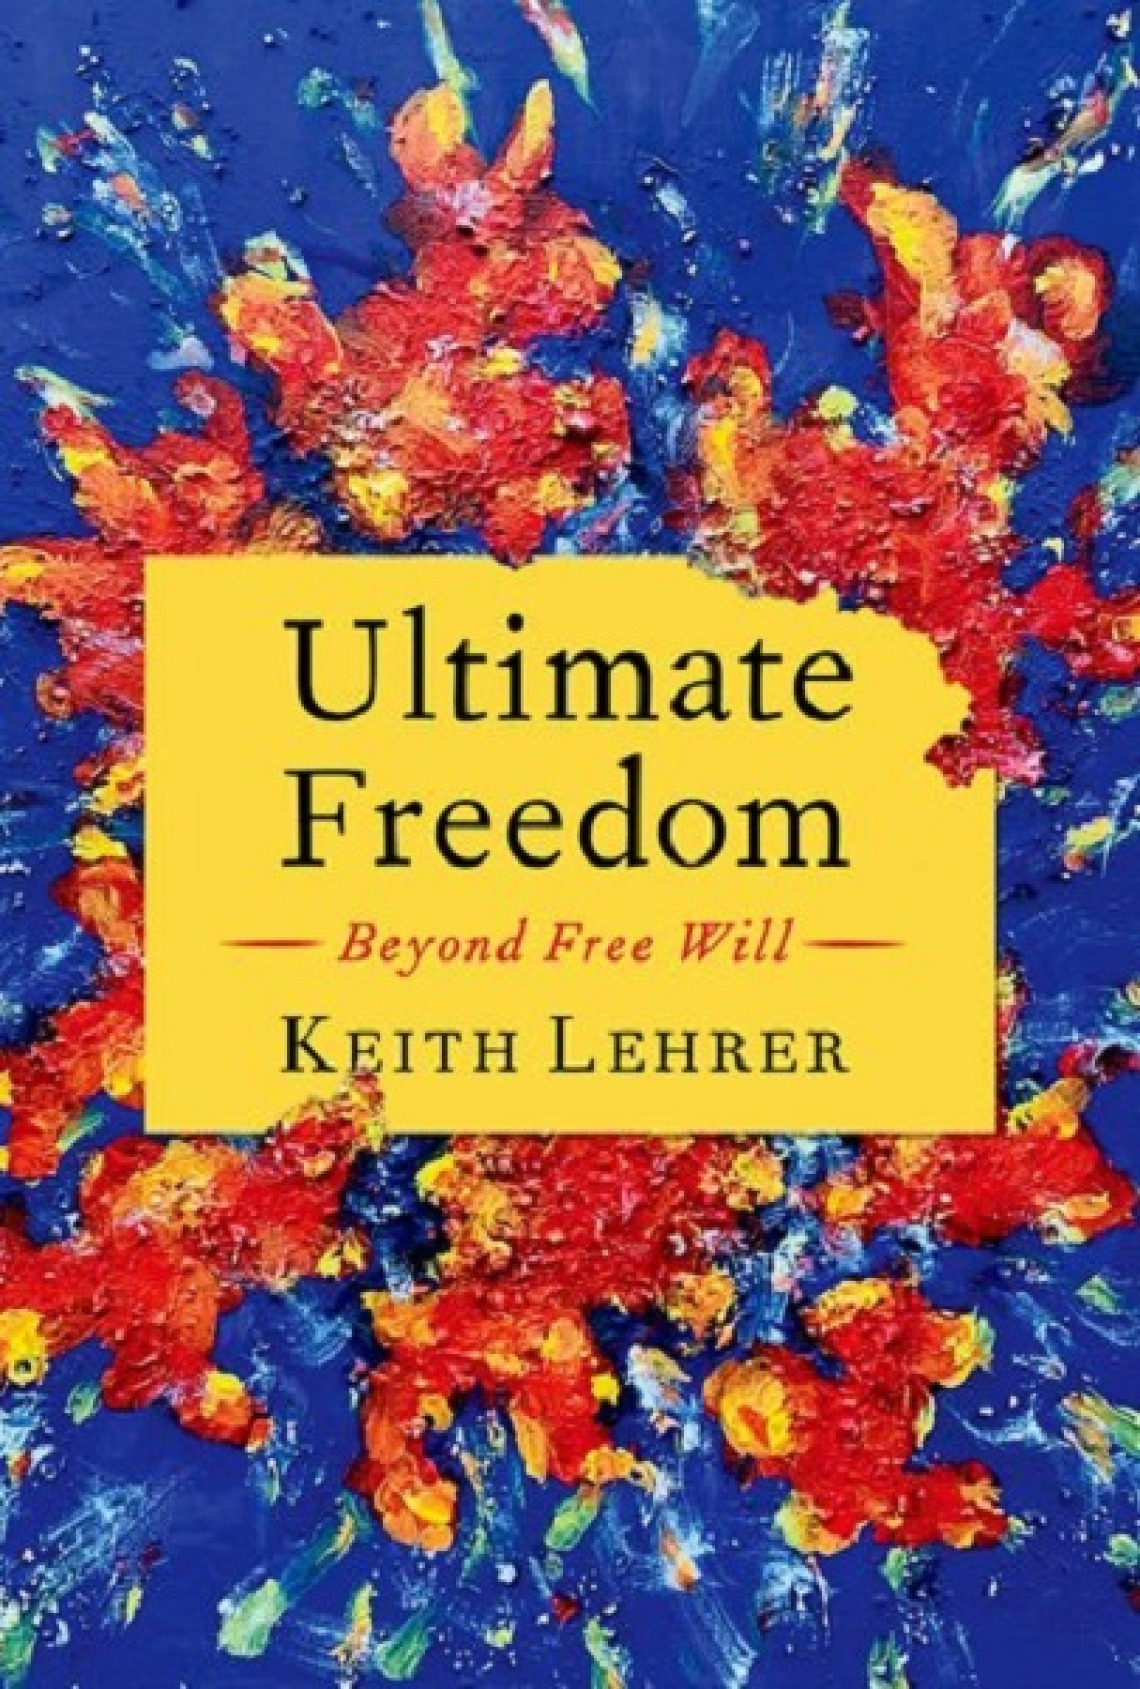 Ultimate Freedom by Keith Lehrer